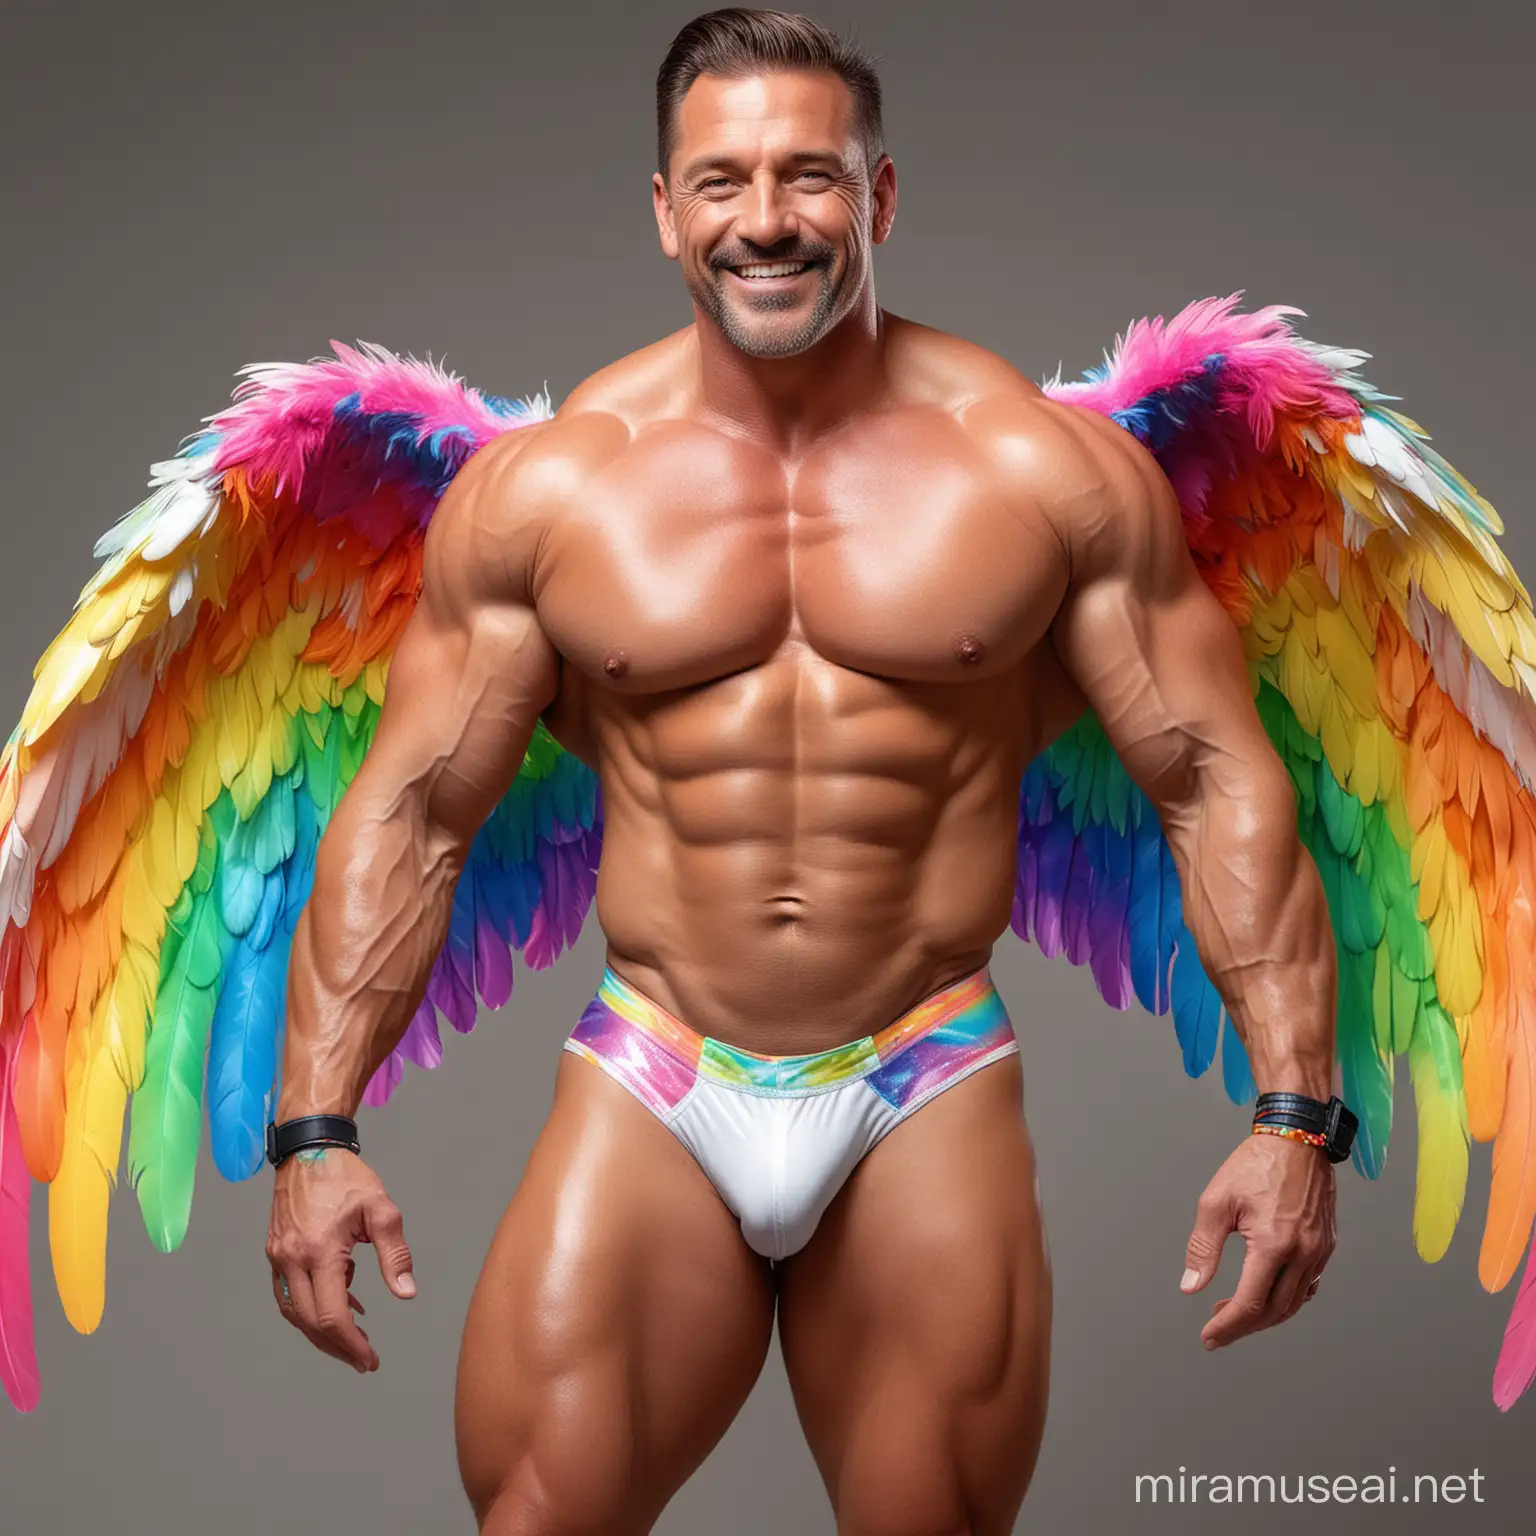 Topless 40s Ultra Chunky Bodybuilder Daddy with Great Smile wearing Multi-Highlighter Bright Rainbow with white Coloured See Through Huge Eagle Wings Shoulder Jacket Short shorts left arm up Flexing